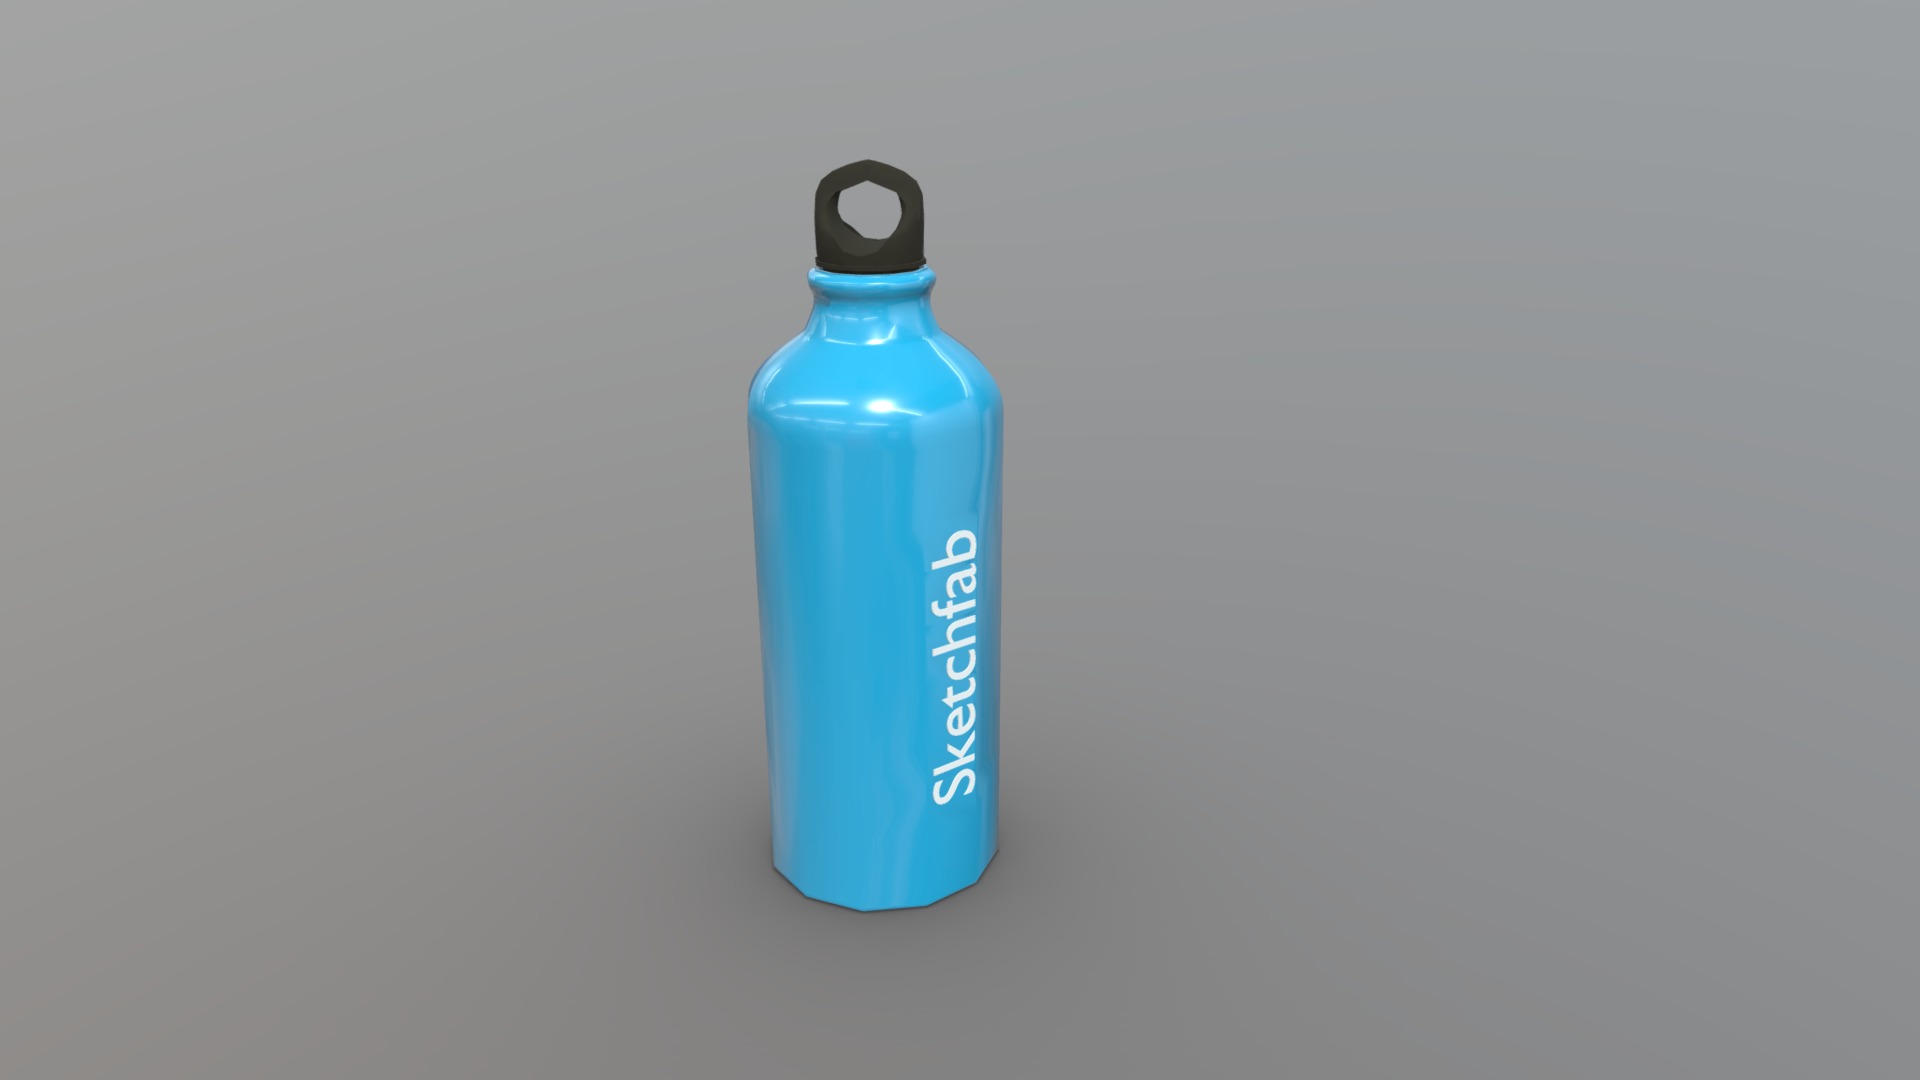 3D model Sketchfab water bottle - This is a 3D model of the Sketchfab water bottle. The 3D model is about a blue bottle with a black cap.